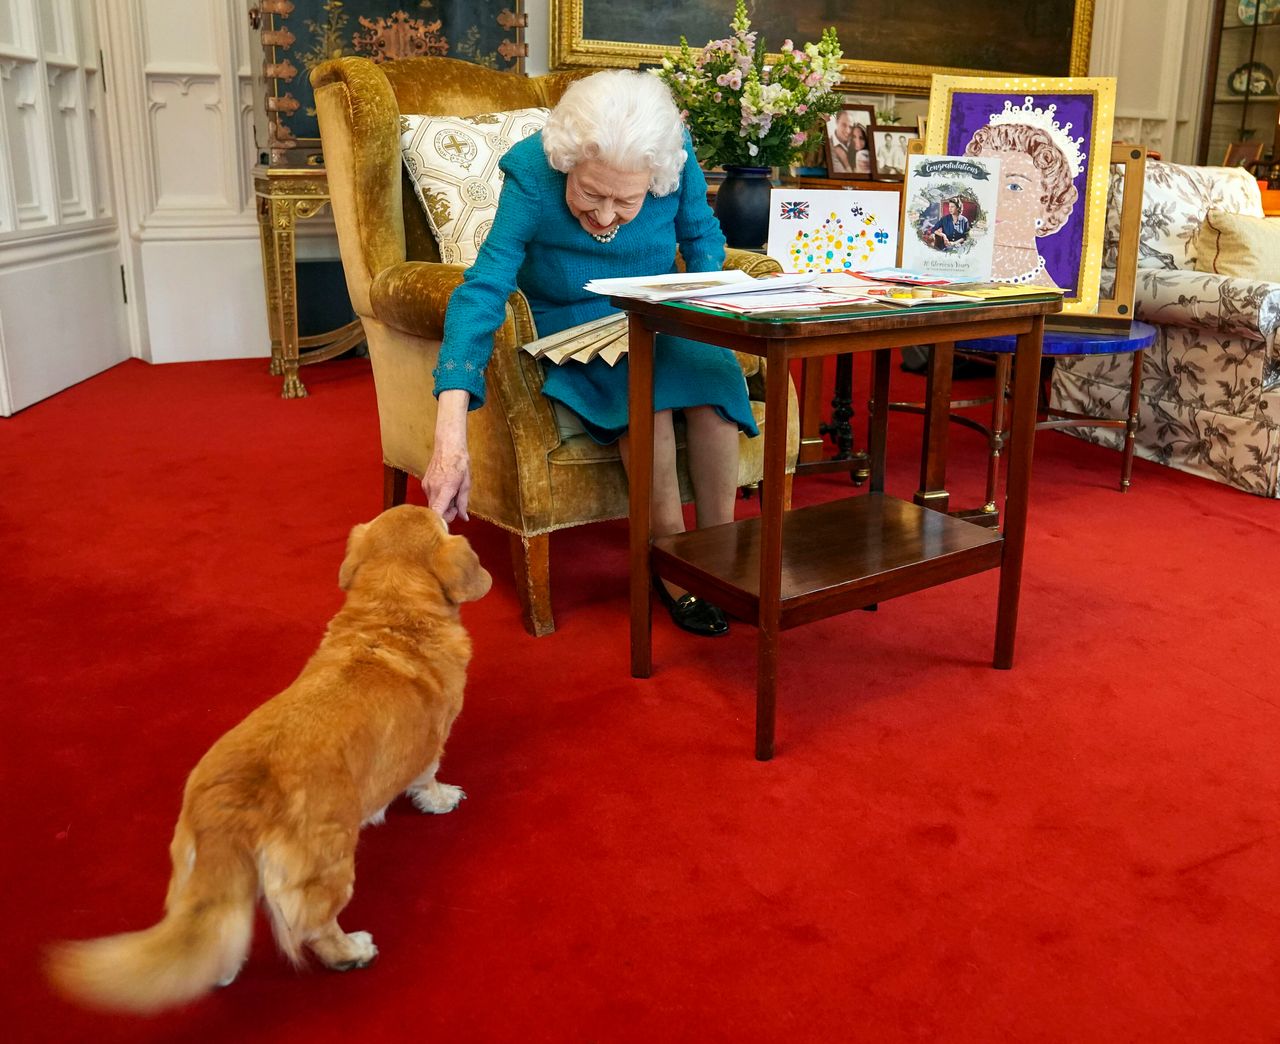 Queen Elizabeth II is joined by one of her dogs, Candy, as she views a display of memorabilia from her Golden and Platinum Jubilees at Windsor Castle on February 4, 2022.